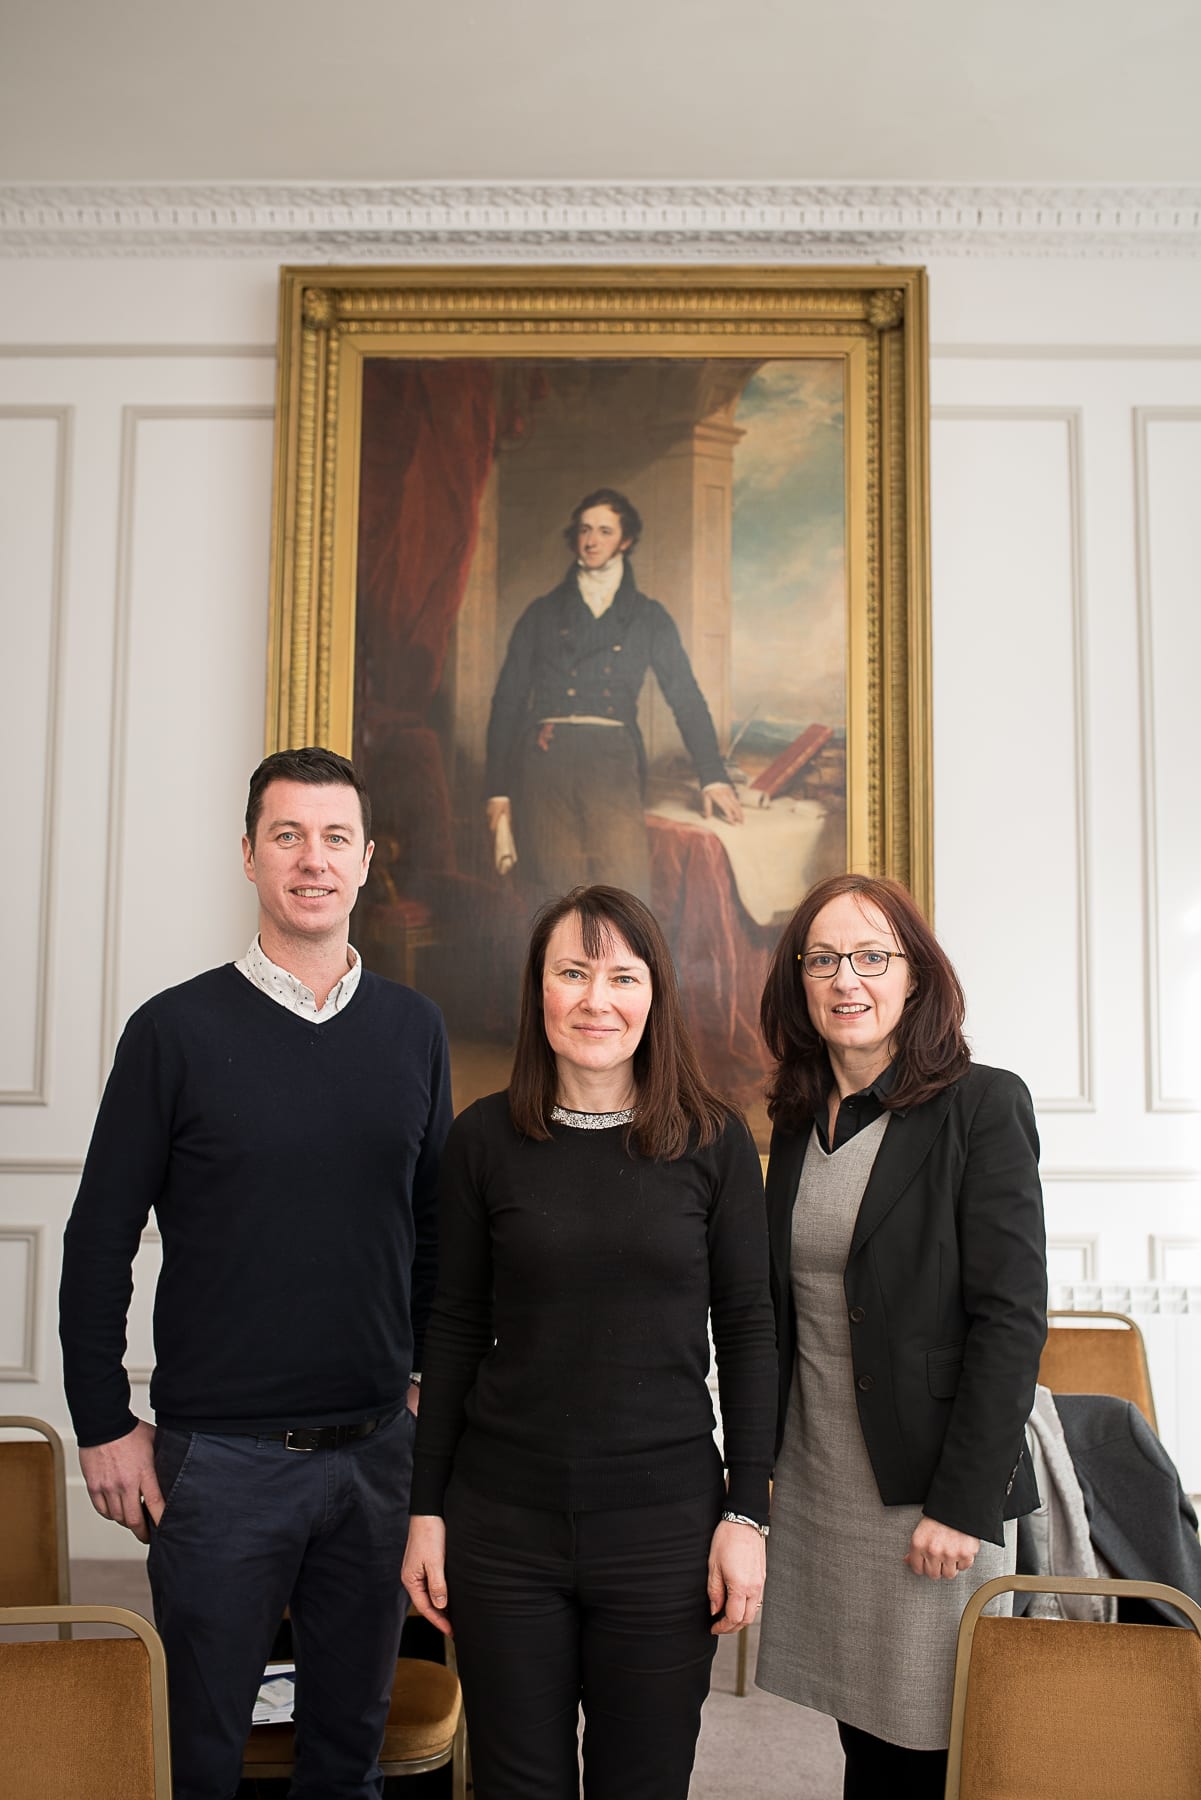 At the Limerick Chamber Skillnet Working Lunchtime Networking with Donal Fitzgibbon was From left to right: Damien Mullins - Act 3, Martina O’Doherty Pery Square Business College, Jacinta Hogan - Pery Square Business College
Image by Morning Star Photography